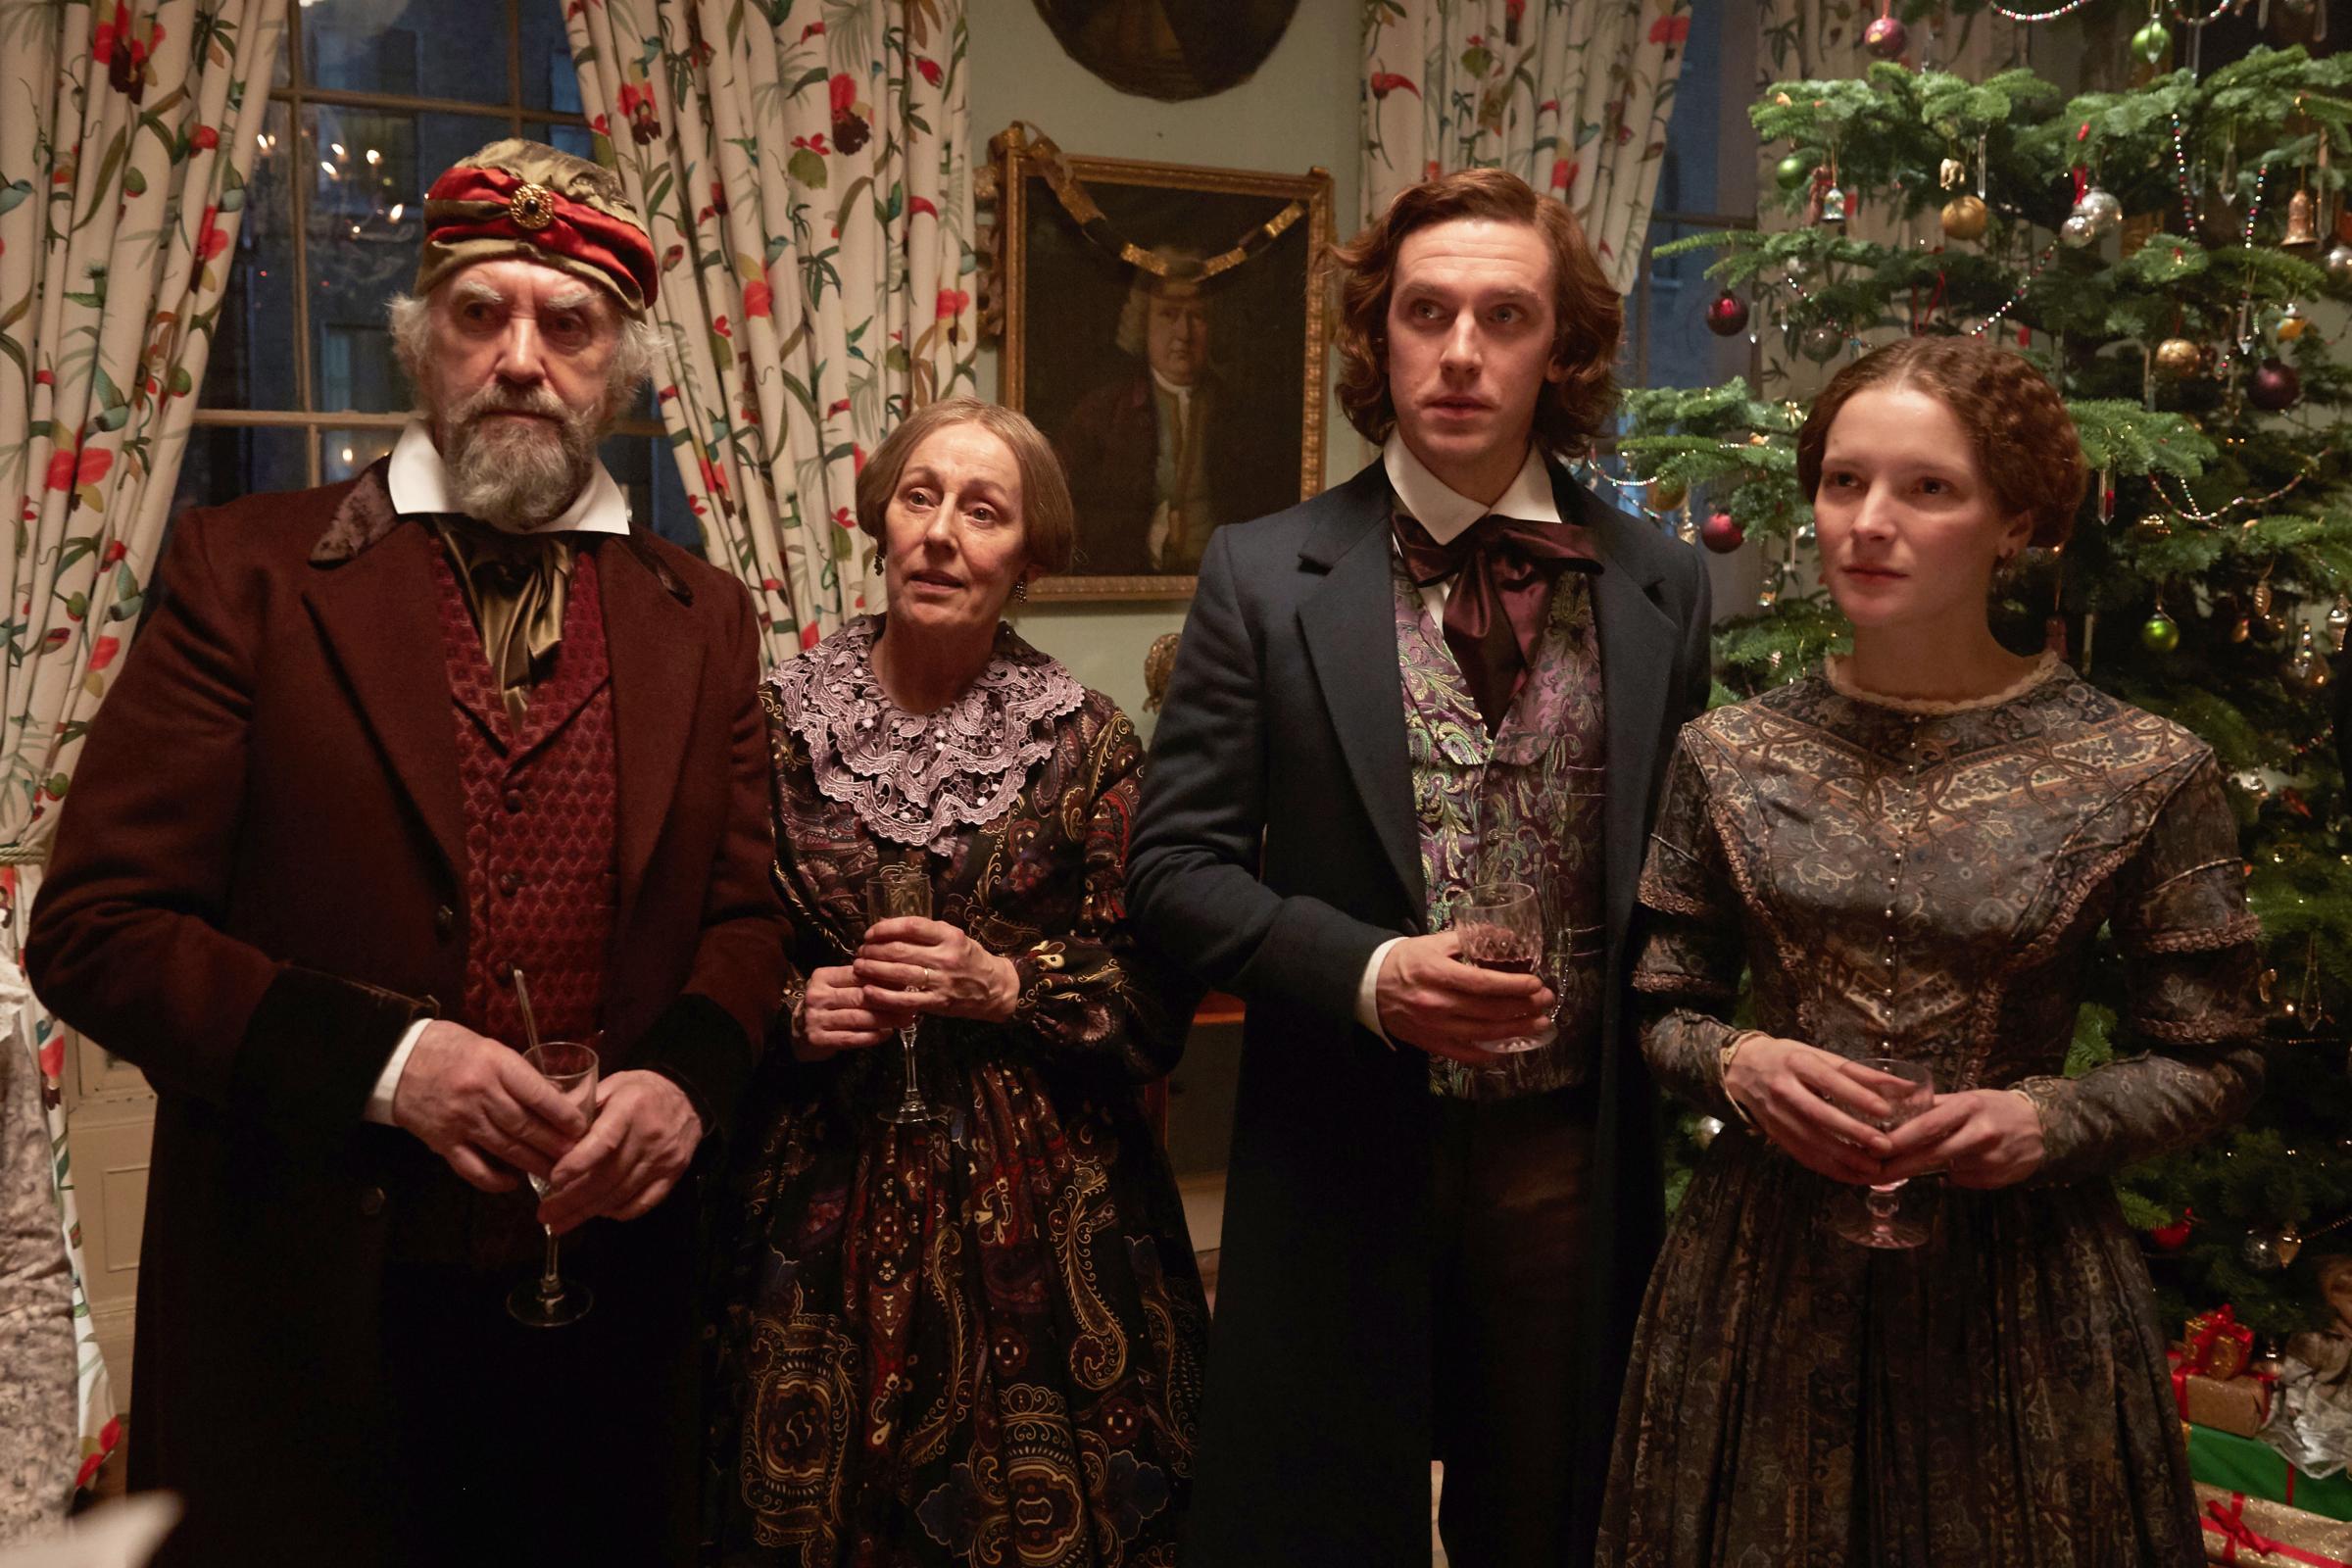 (L to R) Jonathan Pryce as Mr. John Dickens, Ger Ryan as Mrs. Dickens, Dan Stevens as Charles Dickens, and Morfydd Clark as Kate Dickens in director Bharat Nalluri’s THE MAN WHO INVENTED CHRISTMAS, a Bleecker Street release.Credit: Kerry Brown / Bleecker Street